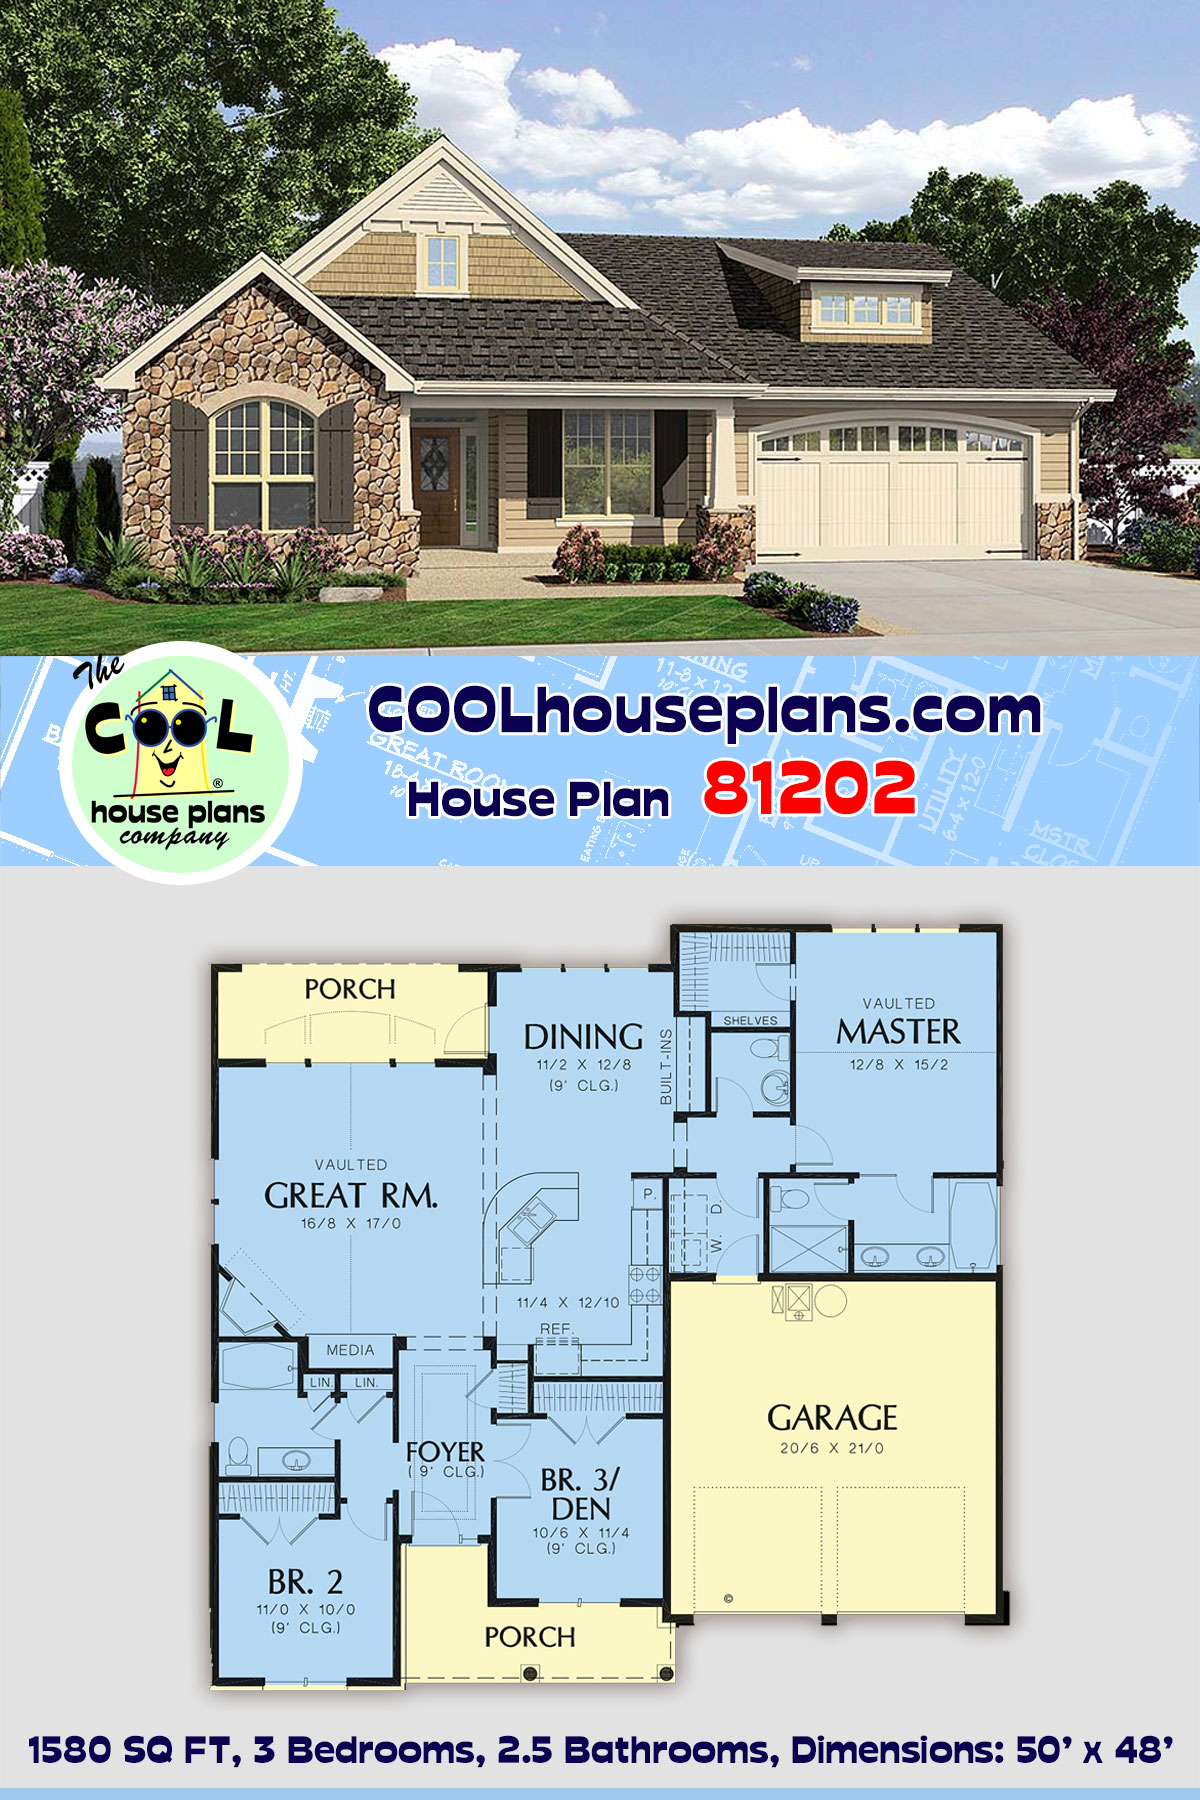 Cottage, Craftsman, French Country, Traditional House Plan 81202 with 3 Beds, 3 Baths, 2 Car Garage